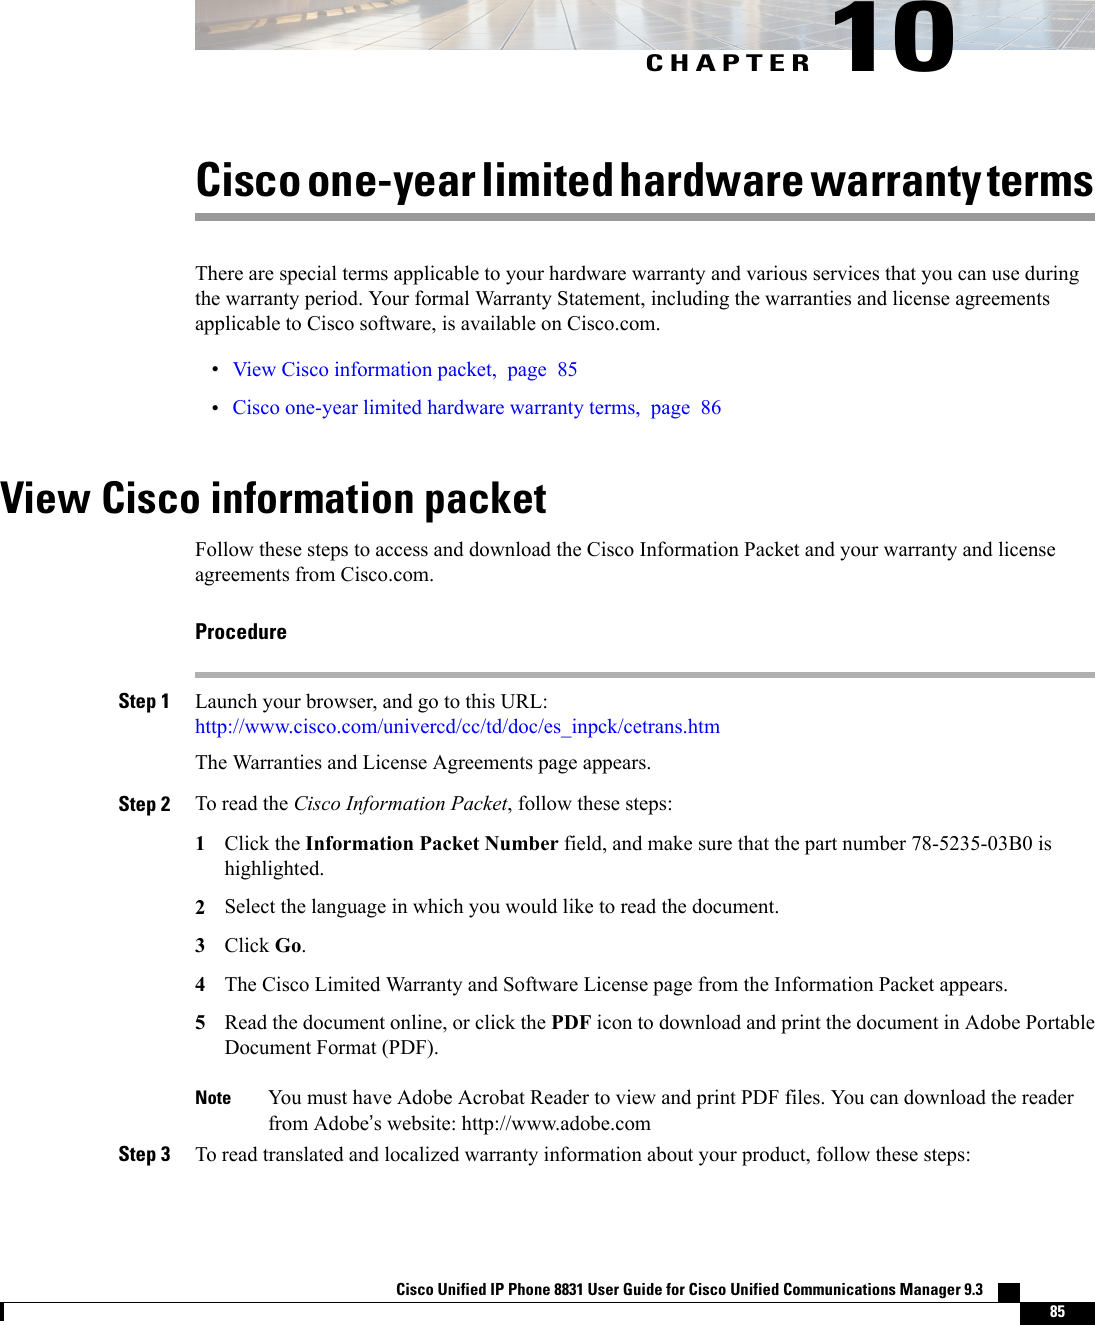 CHAPTER 10Cisco one-year limited hardware warranty termsThere are special terms applicable to your hardware warranty and various services that you can use duringthe warranty period. Your formal Warranty Statement, including the warranties and license agreementsapplicable to Cisco software, is available on Cisco.com.•View Cisco information packet, page 85•Cisco one-year limited hardware warranty terms, page 86View Cisco information packetFollow these steps to access and download the Cisco Information Packet and your warranty and licenseagreements from Cisco.com.ProcedureStep 1 Launch your browser, and go to this URL:http://www.cisco.com/univercd/cc/td/doc/es_inpck/cetrans.htmThe Warranties and License Agreements page appears.Step 2 To read the Cisco Information Packet, follow these steps:1Click the Information Packet Number field, and make sure that the part number 78-5235-03B0 ishighlighted.2Select the language in which you would like to read the document.3Click Go.4The Cisco Limited Warranty and Software License page from the Information Packet appears.5Read the document online, or click the PDF icon to download and print the document in Adobe PortableDocument Format (PDF).You must have Adobe Acrobat Reader to view and print PDF files. You can download the readerfrom Adobe’s website: http://www.adobe.comNoteStep 3 To read translated and localized warranty information about your product, follow these steps:Cisco Unified IP Phone 8831 User Guide for Cisco Unified Communications Manager 9.3    85